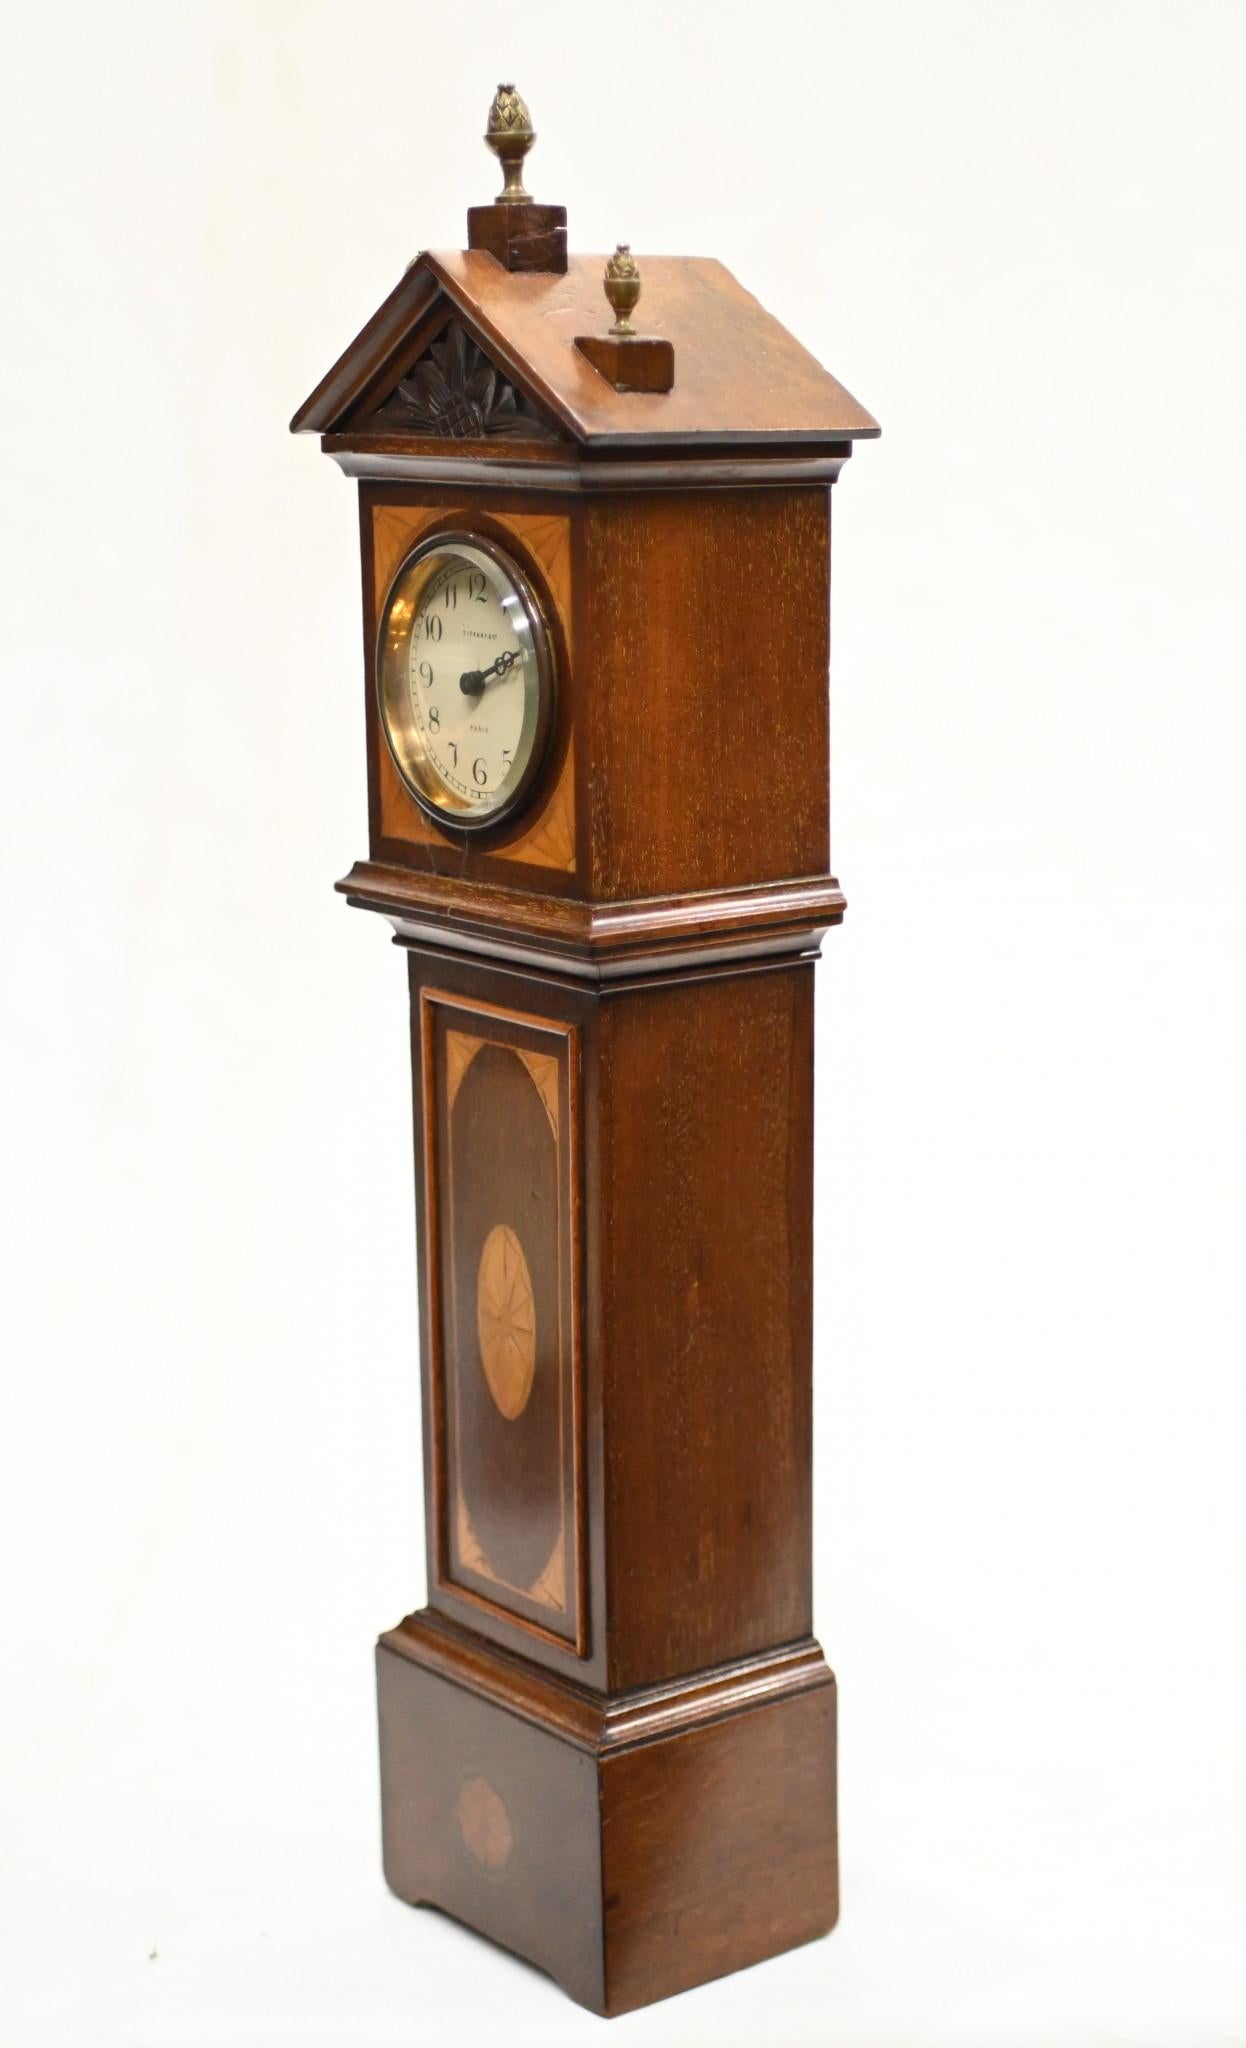 Gorgeous mini Grandfather clock in the Sheraton manner
Circa 1890 on this small apprentice piece
Mahogany with satinwood inlays including shell motifs
Offered in great shape and will ship to anywhere in the world
Please contact us for a shipping